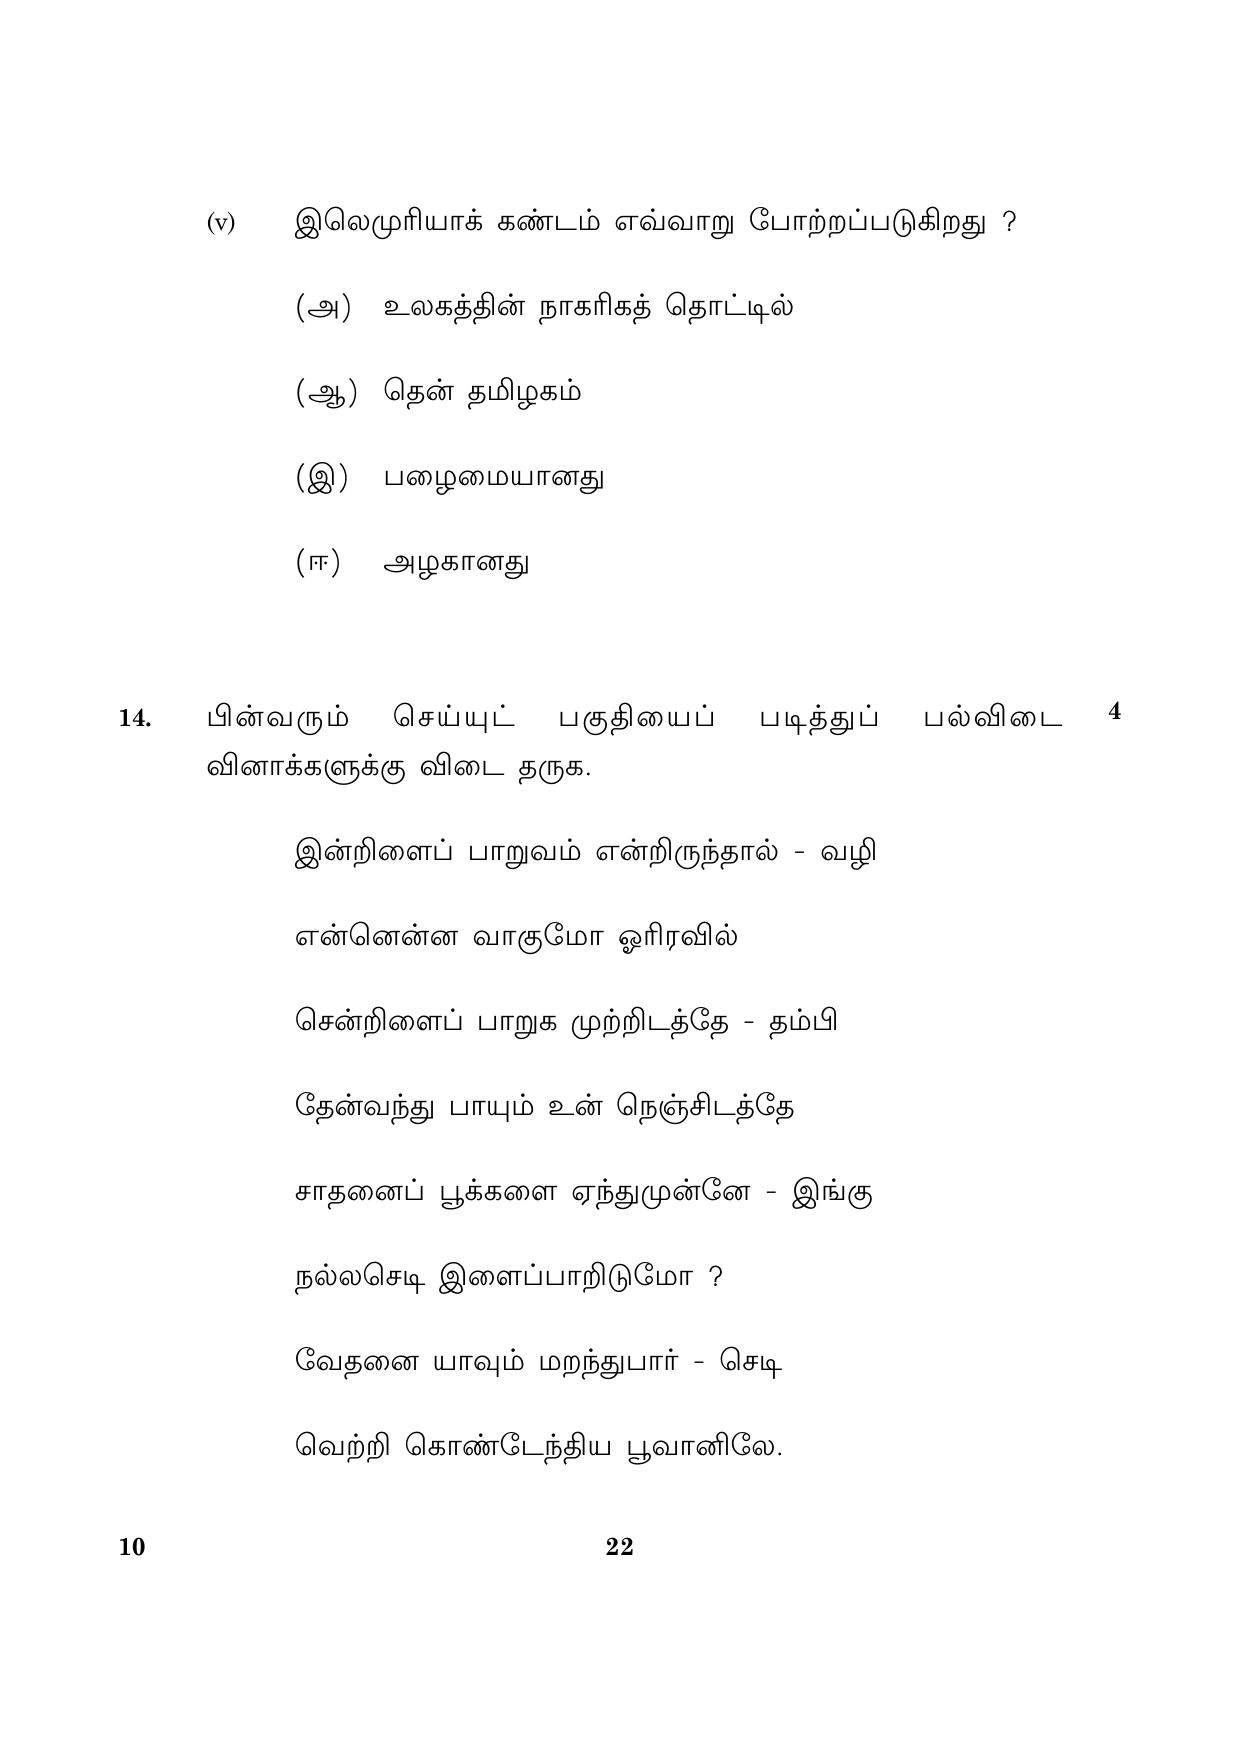 CBSE Class 10 010 Tamil 2016 Question Paper - Page 22